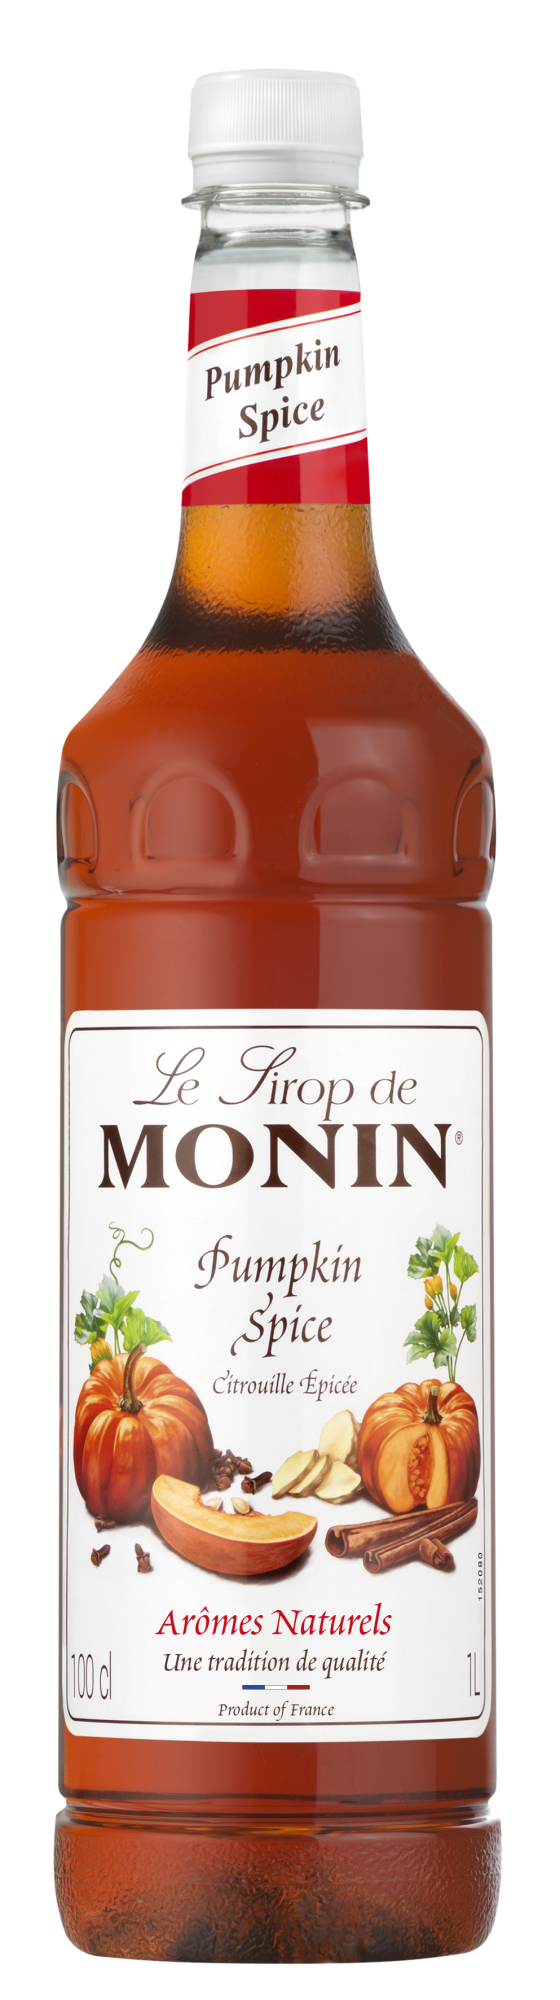 Buy MONIN Pumpkin Spice Syrup. It is perfect for adding an autumnal twist to iced teas, frappes, coffees, cocktails.